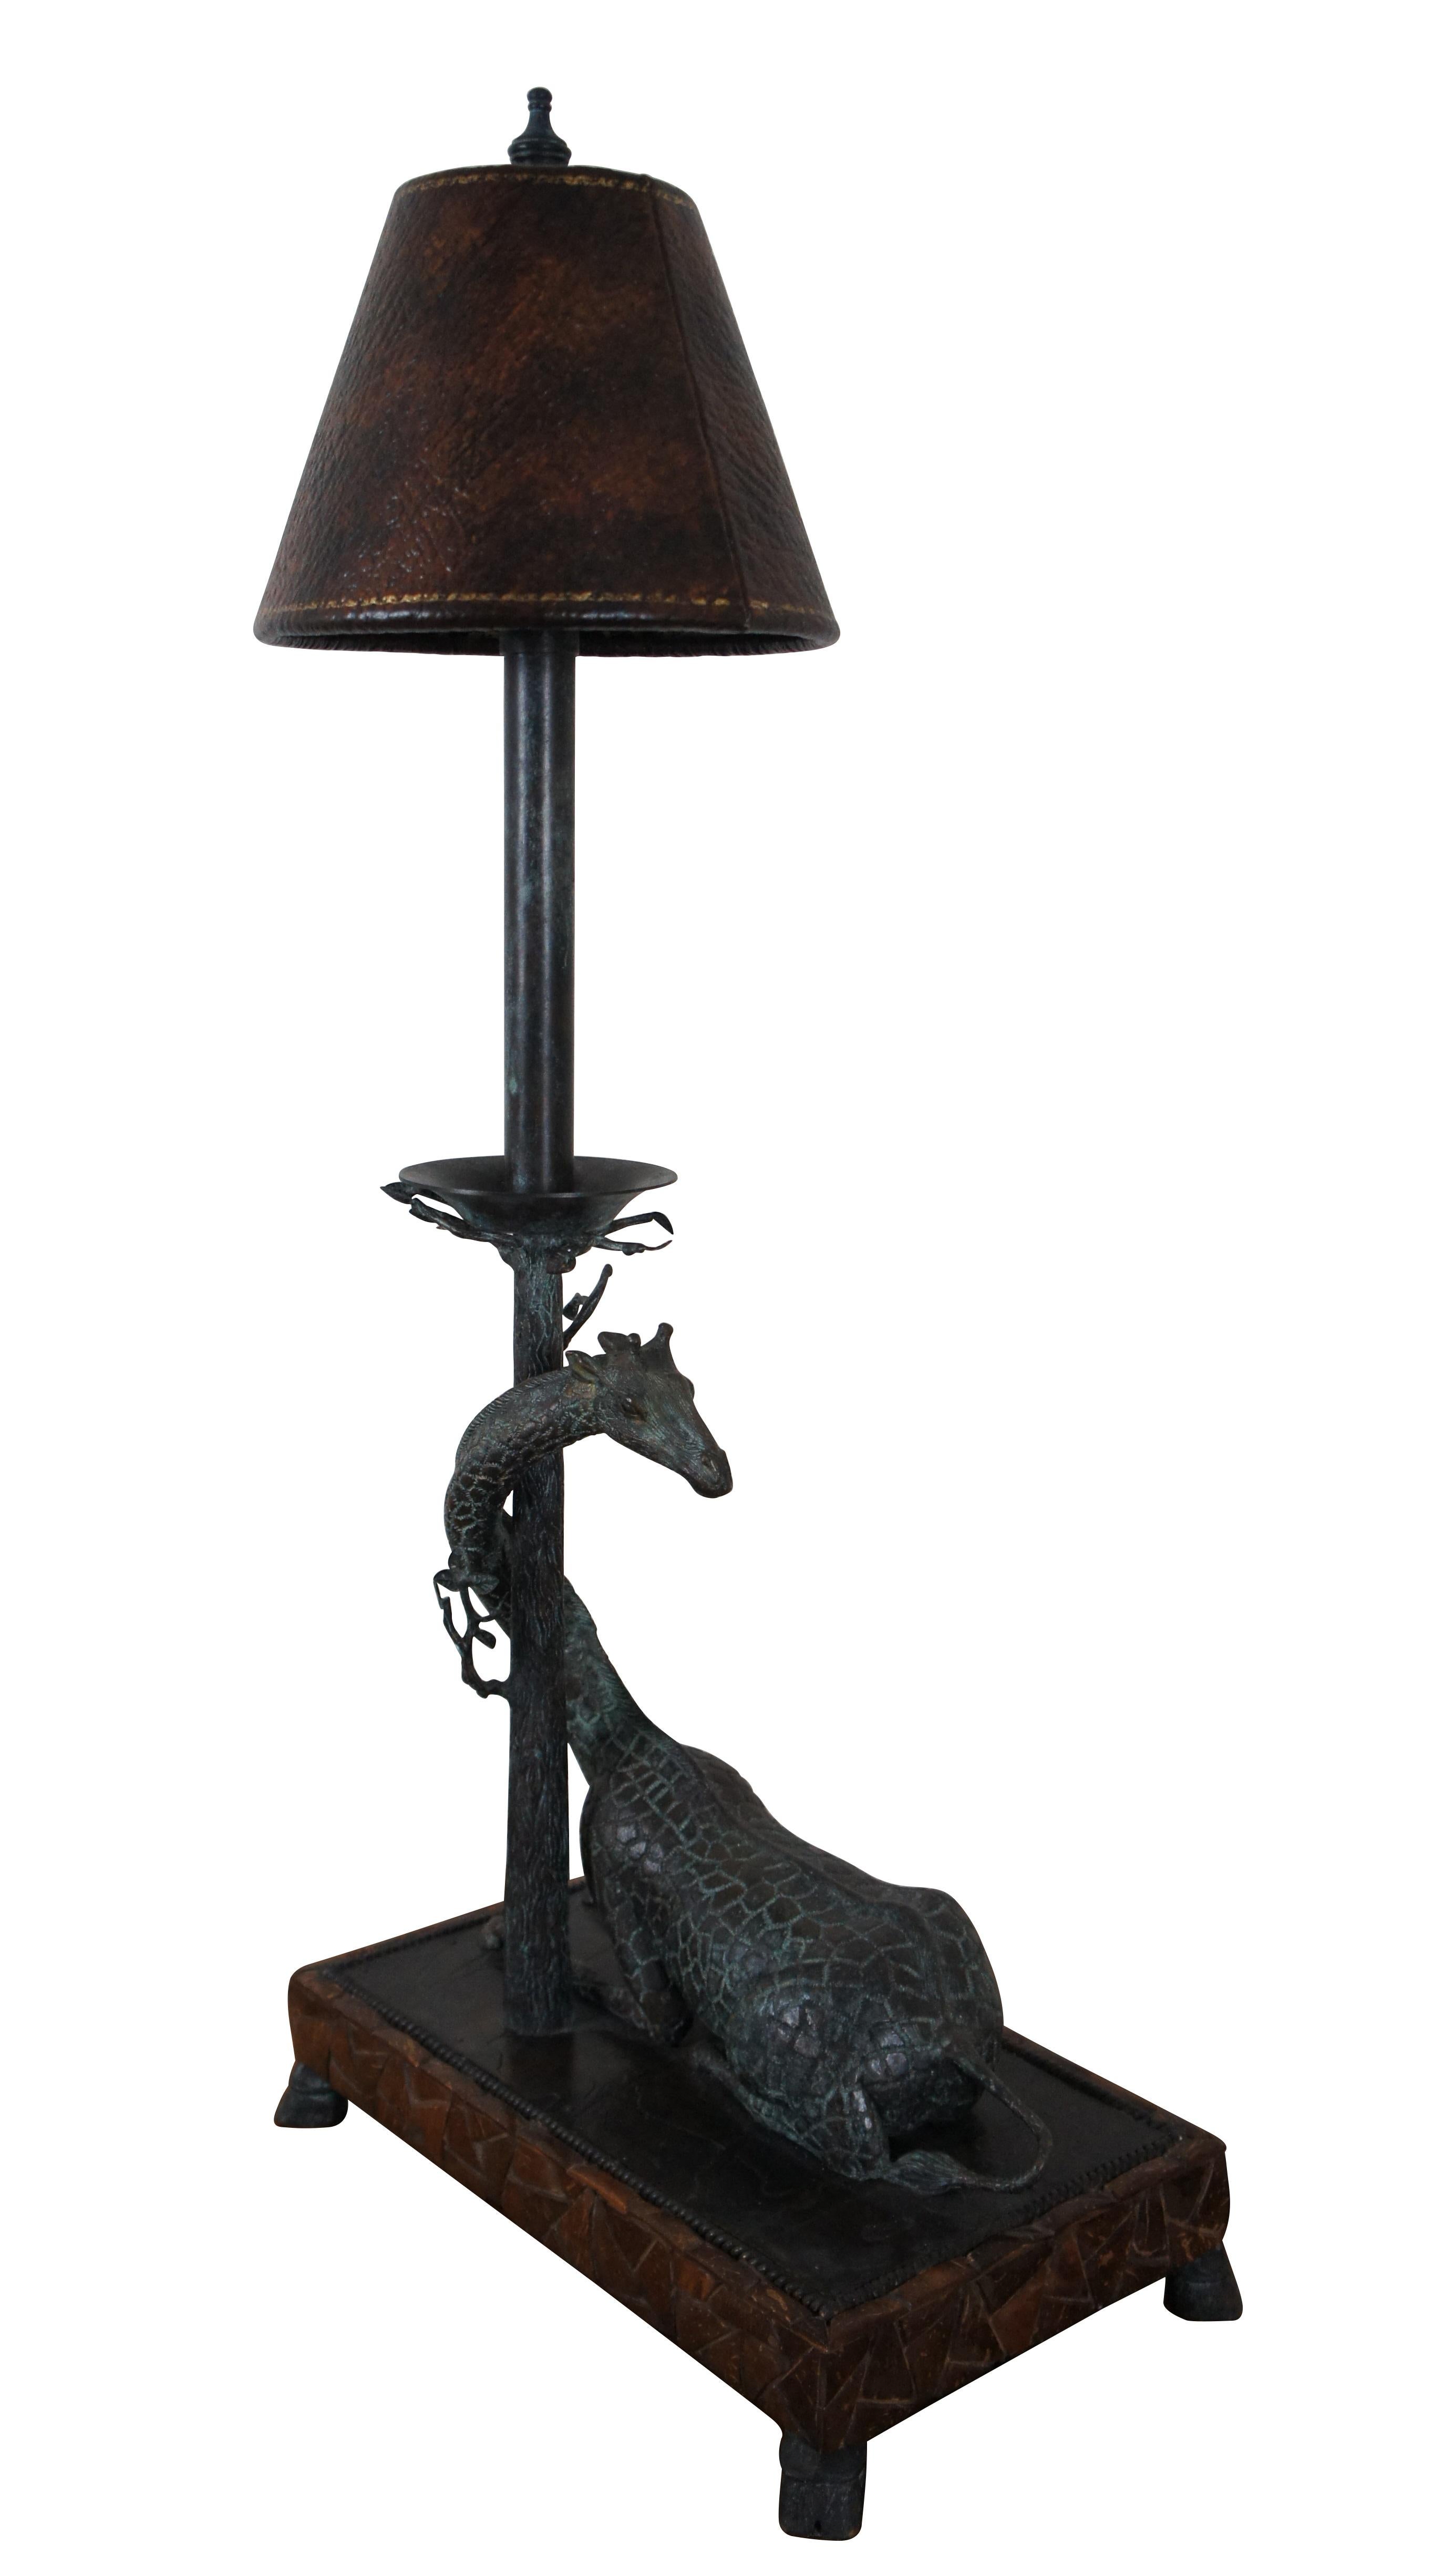 Maitland Smith table lamp, made of bronze with factory distressed patina / verdigris. Rectangular base supported by hoof feet, decorated with a coconut shell mosaic echoing the pattern of giraffe hide. On the base lays a reclining giraffe with its